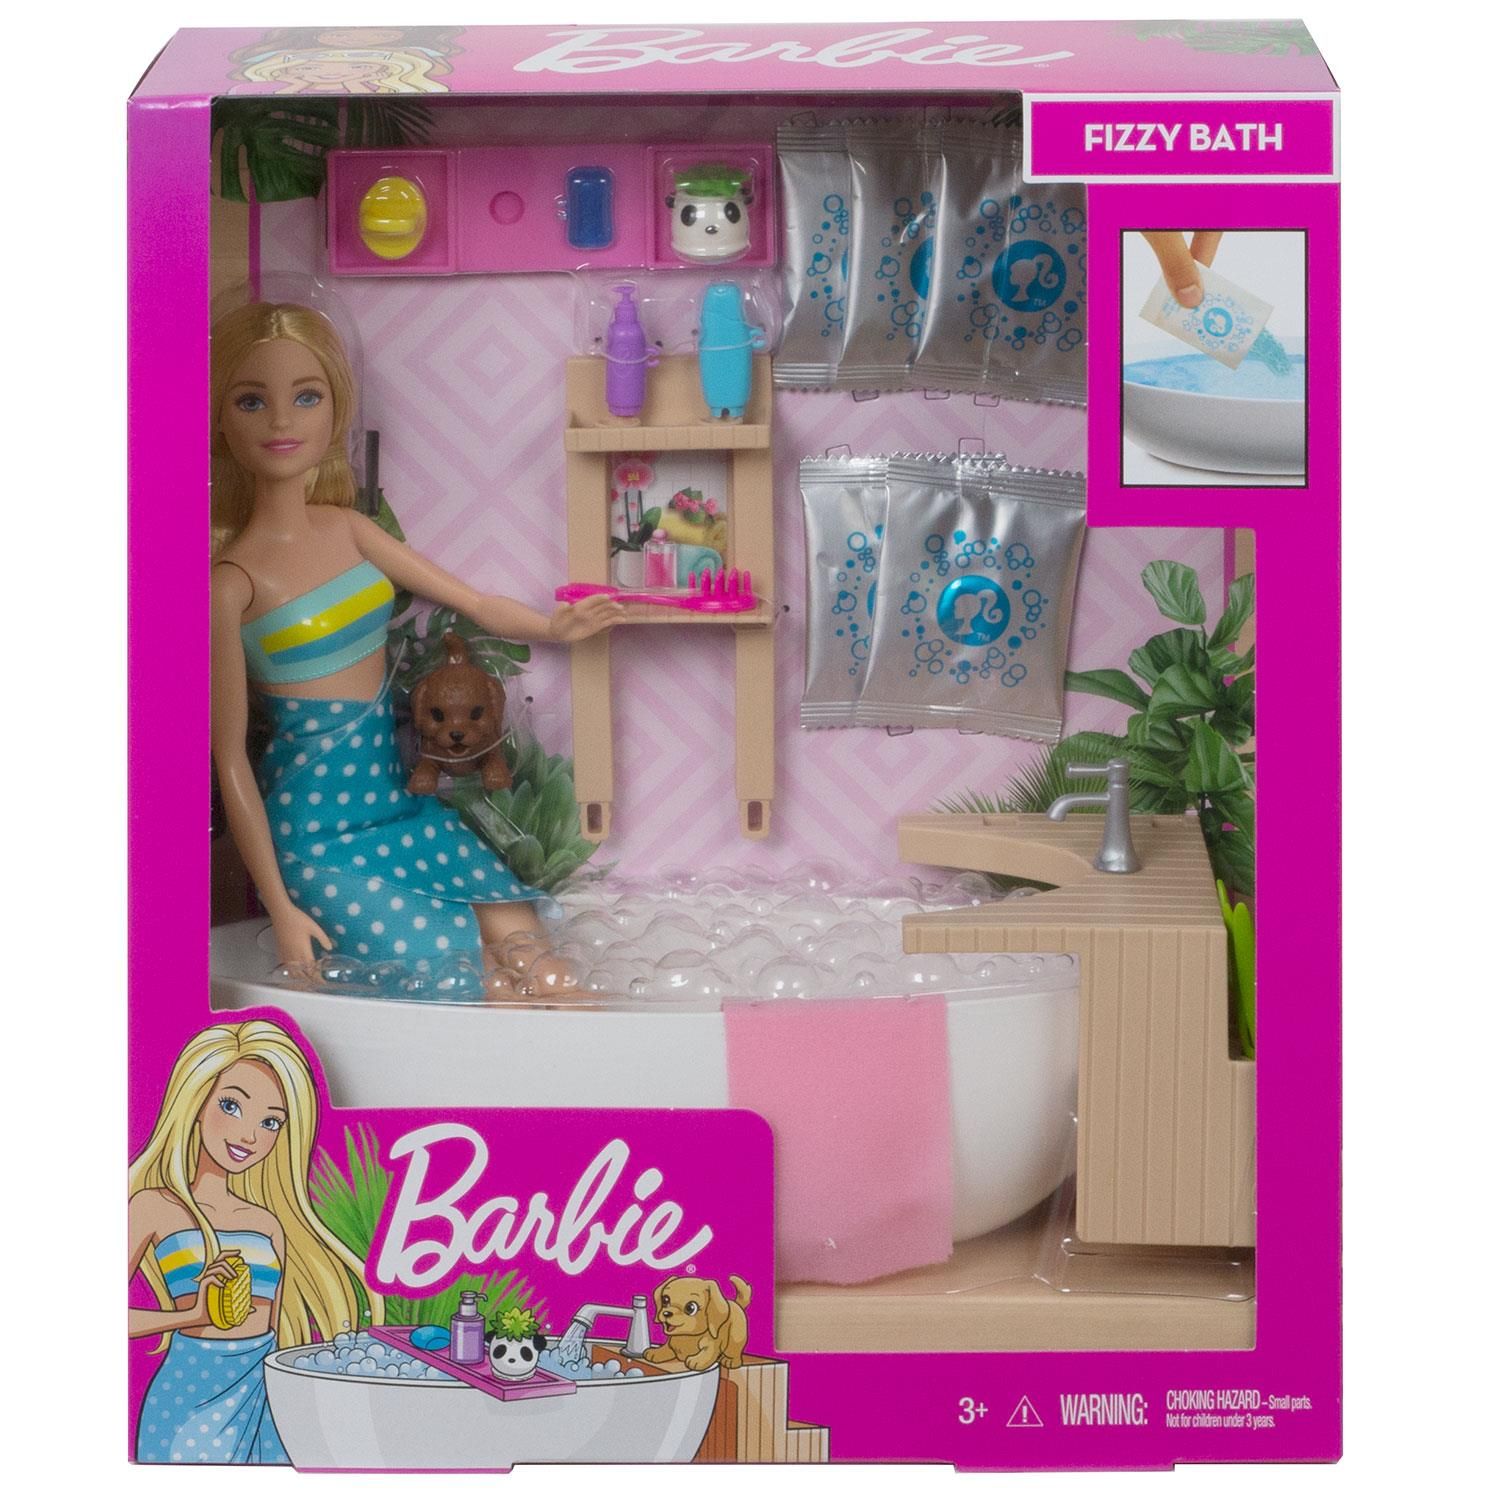 Barbie Fizzy Bath Doll & Playset, Blonde with Tub, Fizzy Powder, Puppy & More

Barbie doll knows the way to be one best is to give yourself the best care This spa-themed playset celebrates one of her favourite ways to recharge: a fizzing bath. It comes with a Barbie doll, a puppy, a spa tub, and accessories to play out a real fizzy bath. Simply fill the tub with water, place the Barbie doll inside and add one of the five included glittery fizz packs to see the water bubble, just like in a real spa Barbie doll can relax with accessories that include a tub tray, bath products, a loofah, a back brush, and a towel. The spa is calming, too, with a wood-inspired frame complete with a panda planter. There's lots of space for puppies to sit, plus spots to store the accessories. Some pieces have a handle the doll can hold to encourage easy role-play fun. The Barbie doll wears a swimsuit with a wrap-around towel and features extra flexibility for realistic posing and active play.

Features:

Kids can practice self-care as they help Barbie doll recharge with this spa-themed playset that lets them play out a classic moment -- a glittery, fizzy bath.
​The set includes a Barbie doll wearing a swimsuit, her puppy, a bathtub, a spa frame, 5 packs of fizzy powder and accessories to help play out a relaxing bath.
​To start the spa-like action, fill the tub with water, place the doll inside and add one of the glittery fizz packs -- the water will change colour, bubble, and foam for a life-like experience.
​Bath accessories expand the storytelling opportunities -- handles on some of the pieces make it easier for kids to role-play; place the products and brushes on the bath tray or store them on the spa frame.
​The wood-inspired frame has a plug-and-play design to hold accessories in place for active play and easy cleanup; plants add realistic calming touches.

Package Includes: Barbie Fizzy Bath Doll & Playset